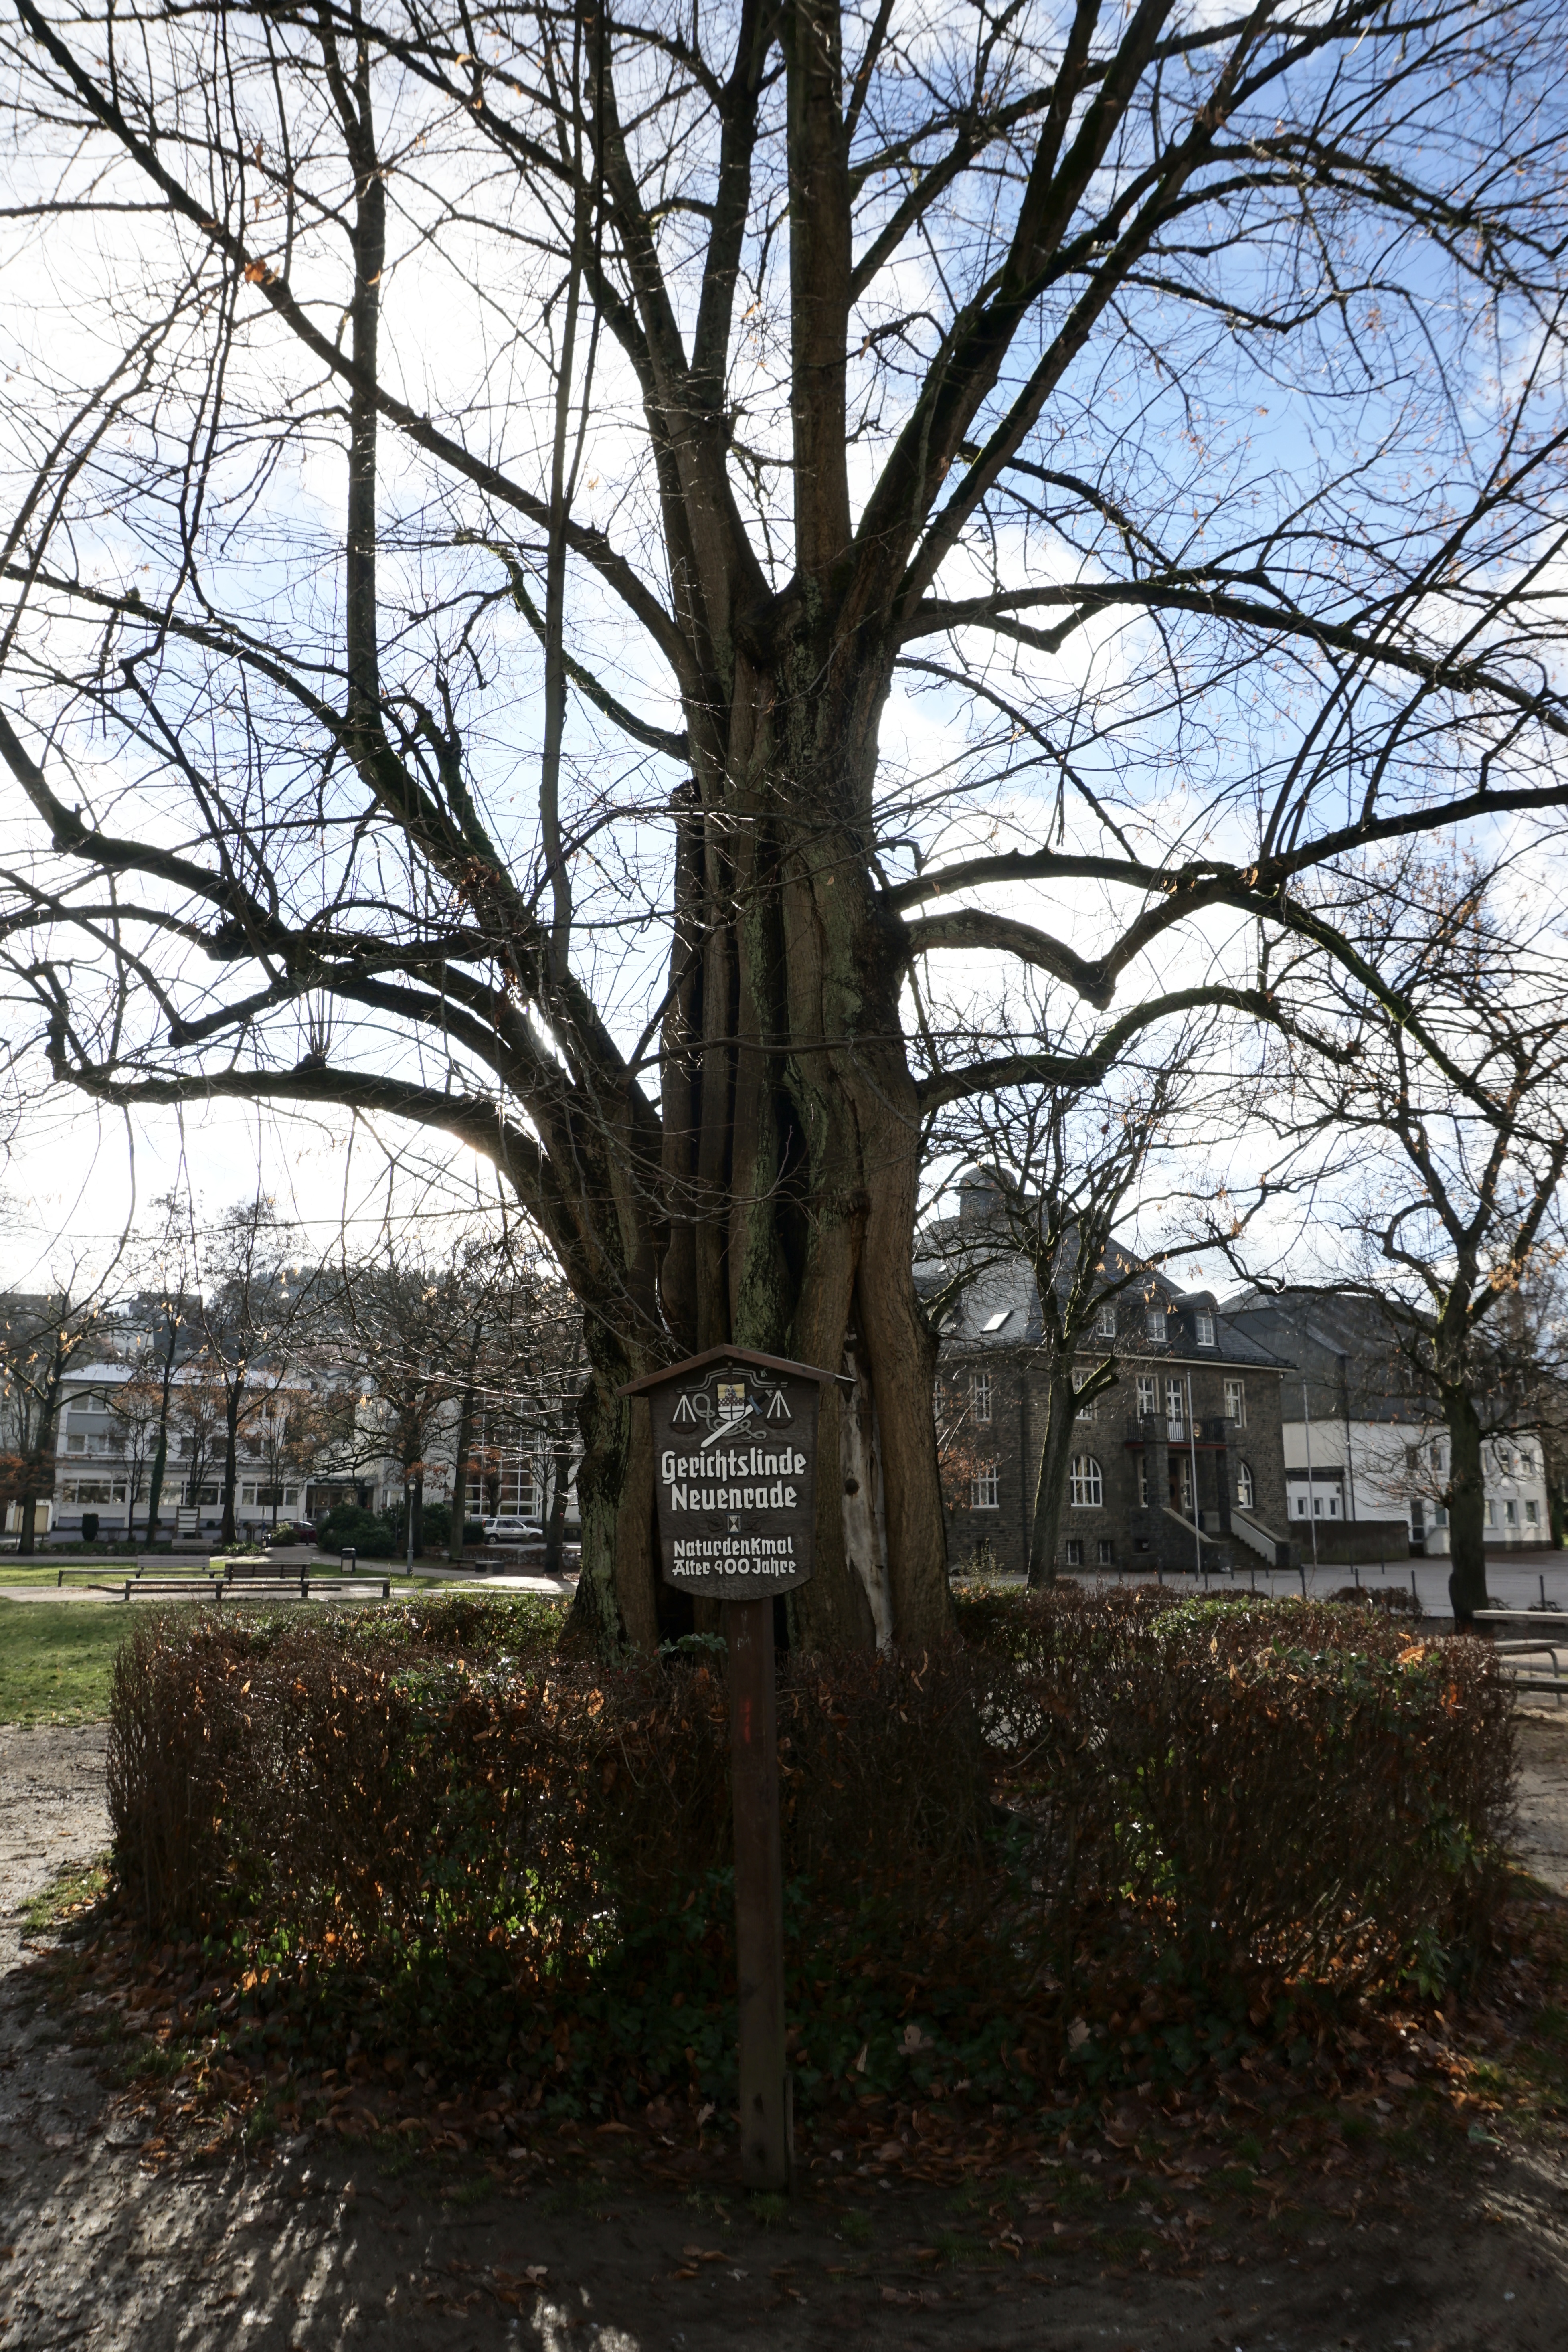 Linden tree in Neuenrade Germany with a wooden sign saying it's a 900 year old Gerichtslinde where judicial courts were held